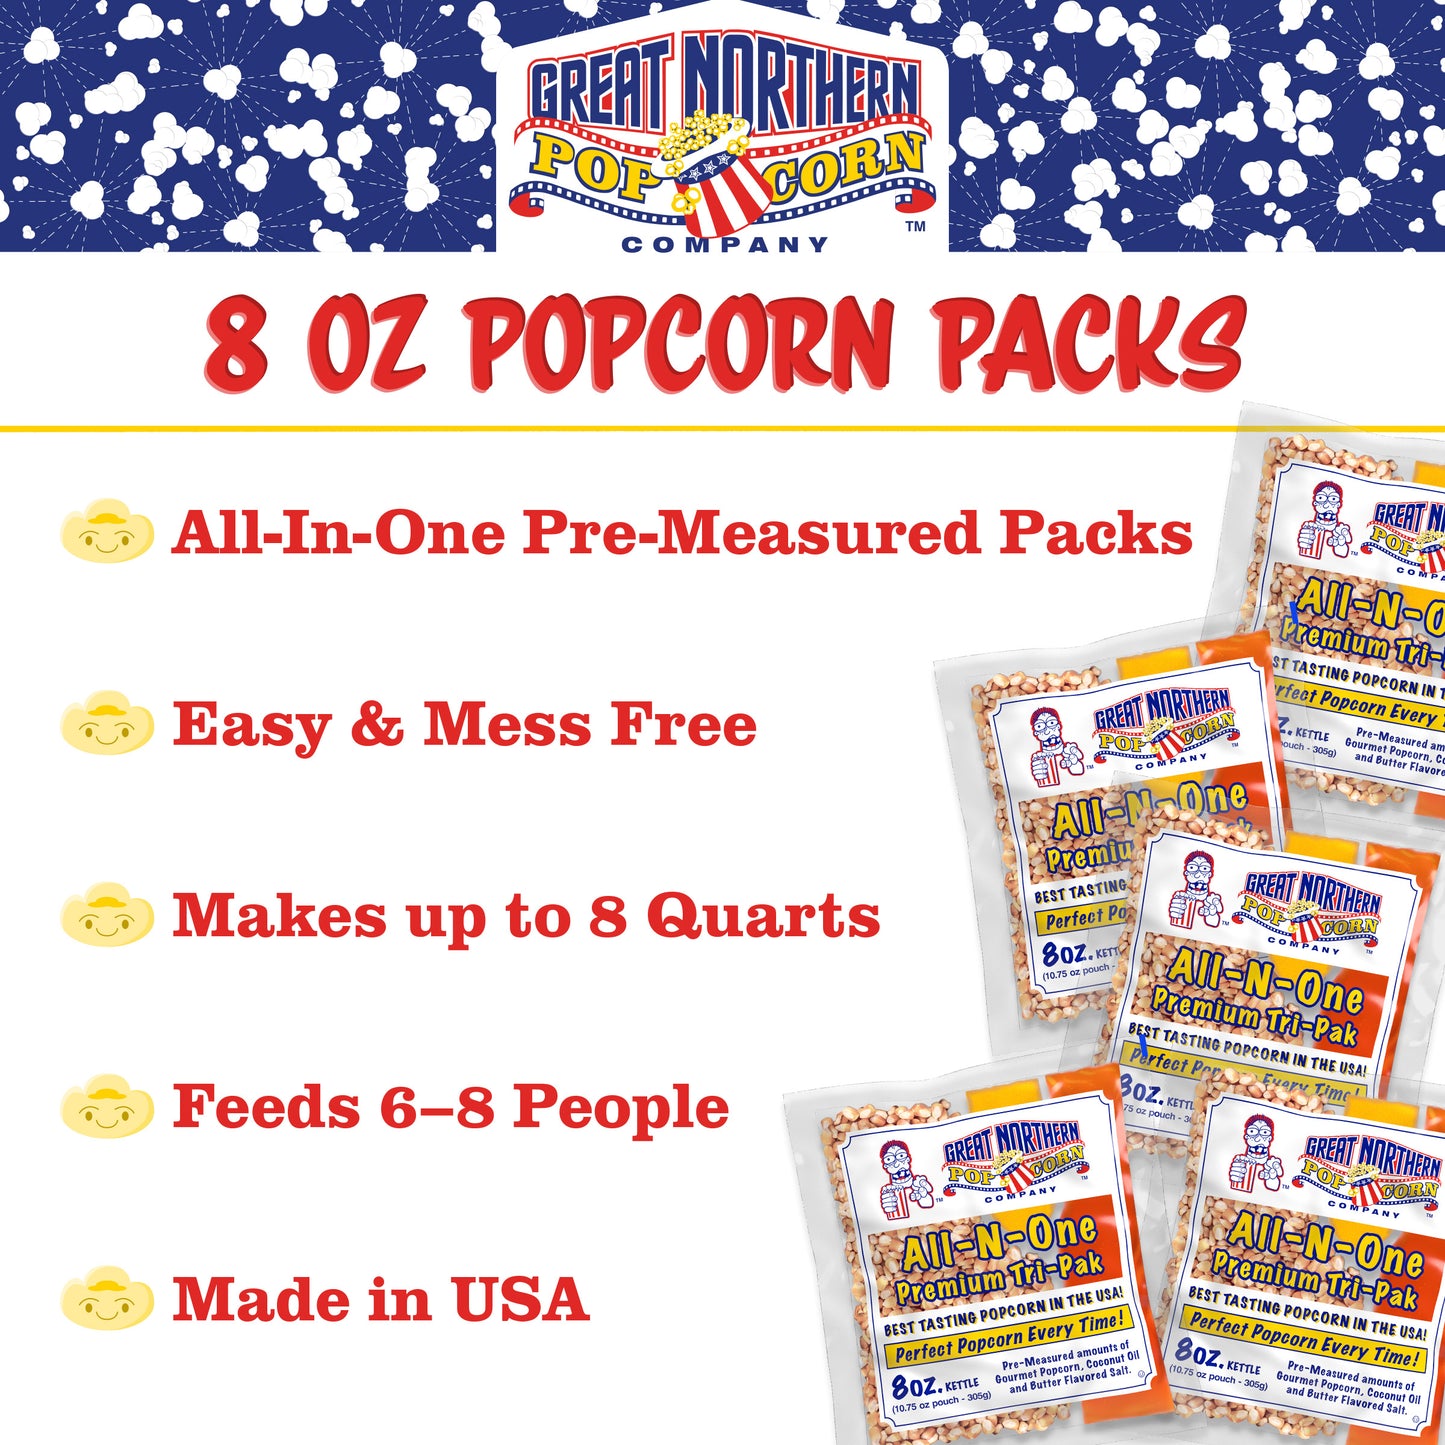 Matinee Popcorn Machine with Cart, 8 Ounce Kettle and 5 All-In-One Popcorn Packs - Red